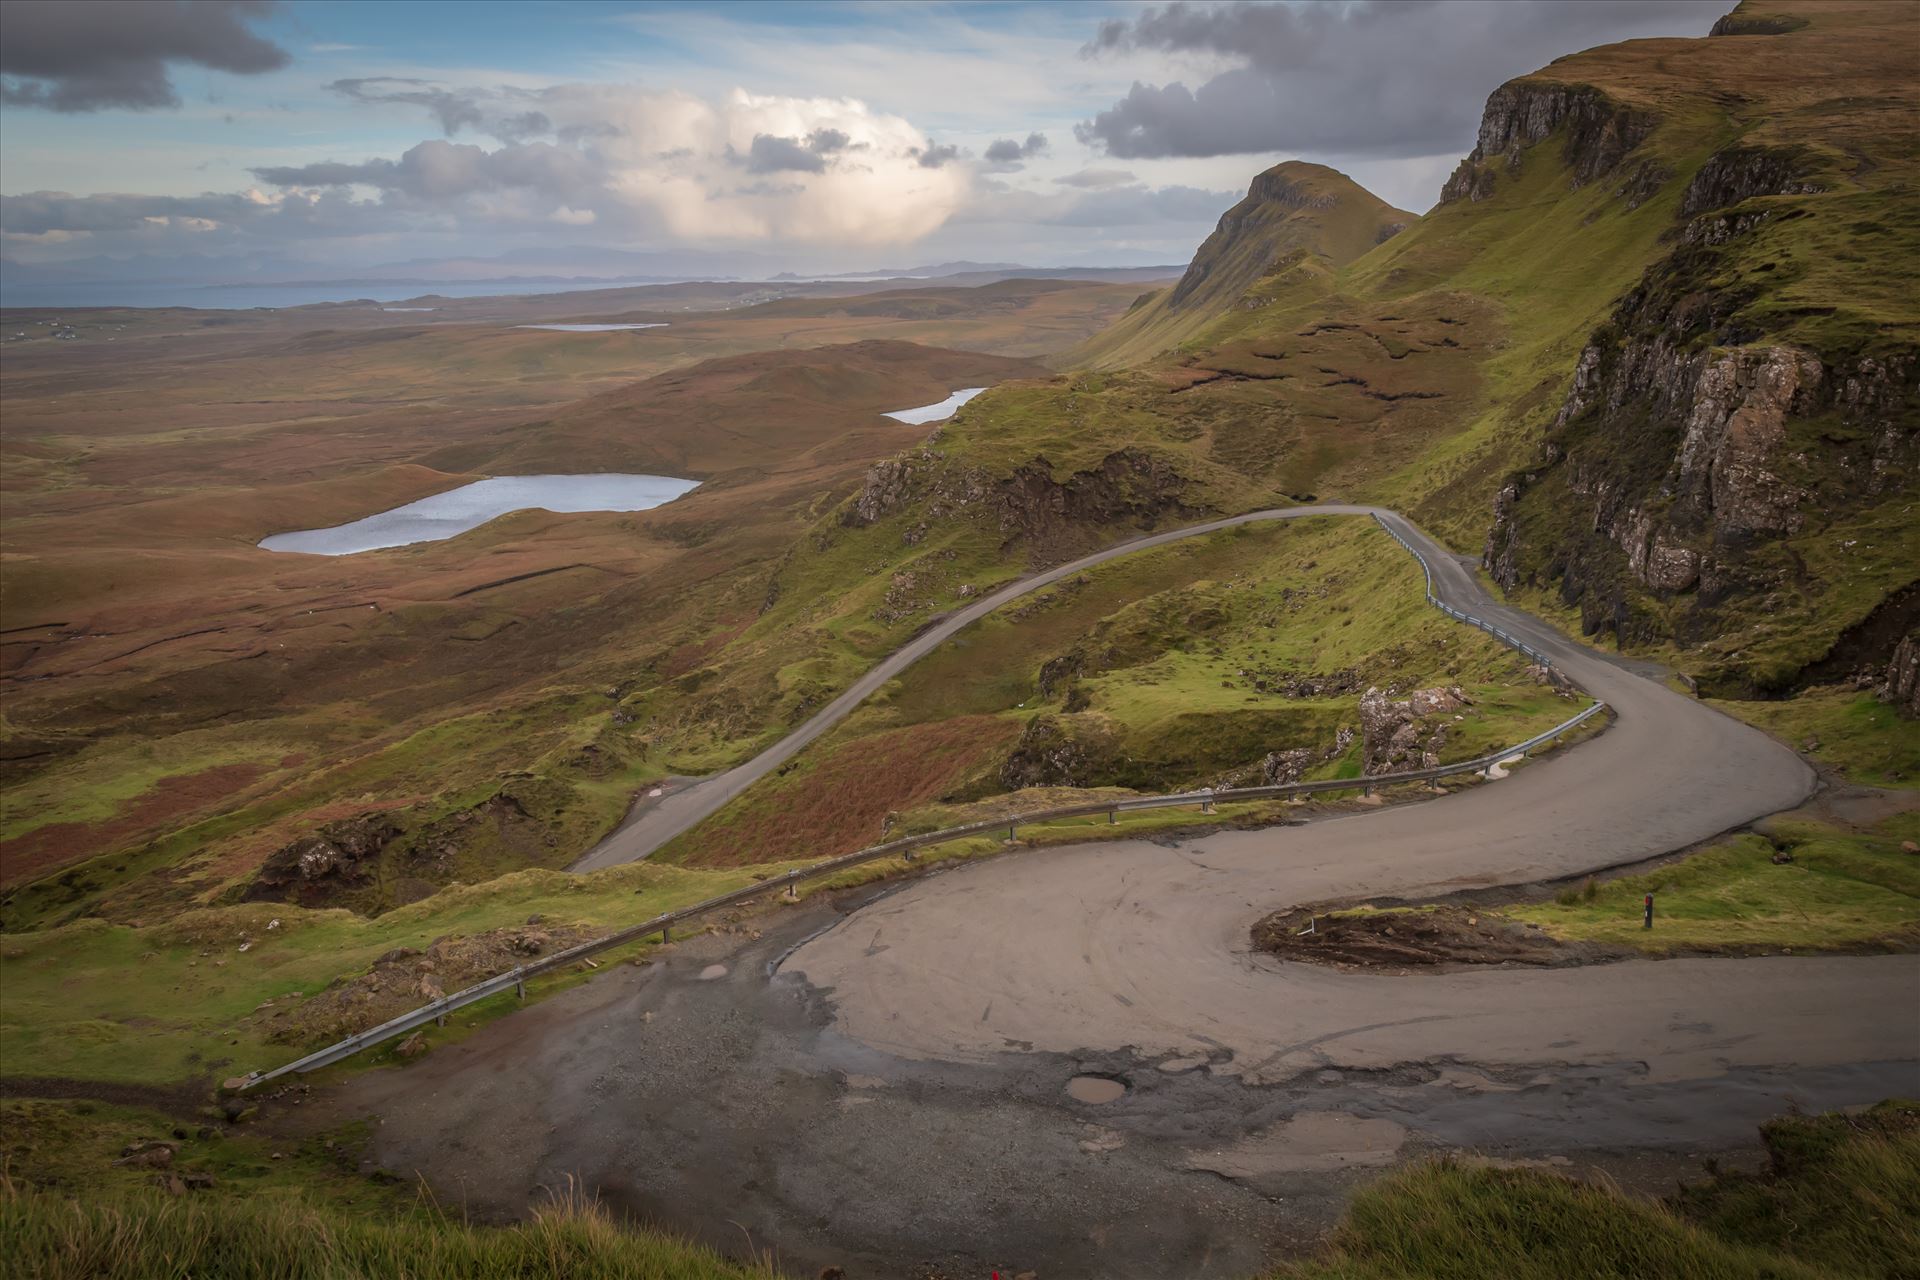 The Quiraing (4) - The Quiraing is a landslip on the northernmost summit of the Trotternish on the Isle of Skye. The whole of the Trotternish Ridge escarpment was formed by a great series of landslips, the Quiraing is the only part of the slip still moving. by philreay